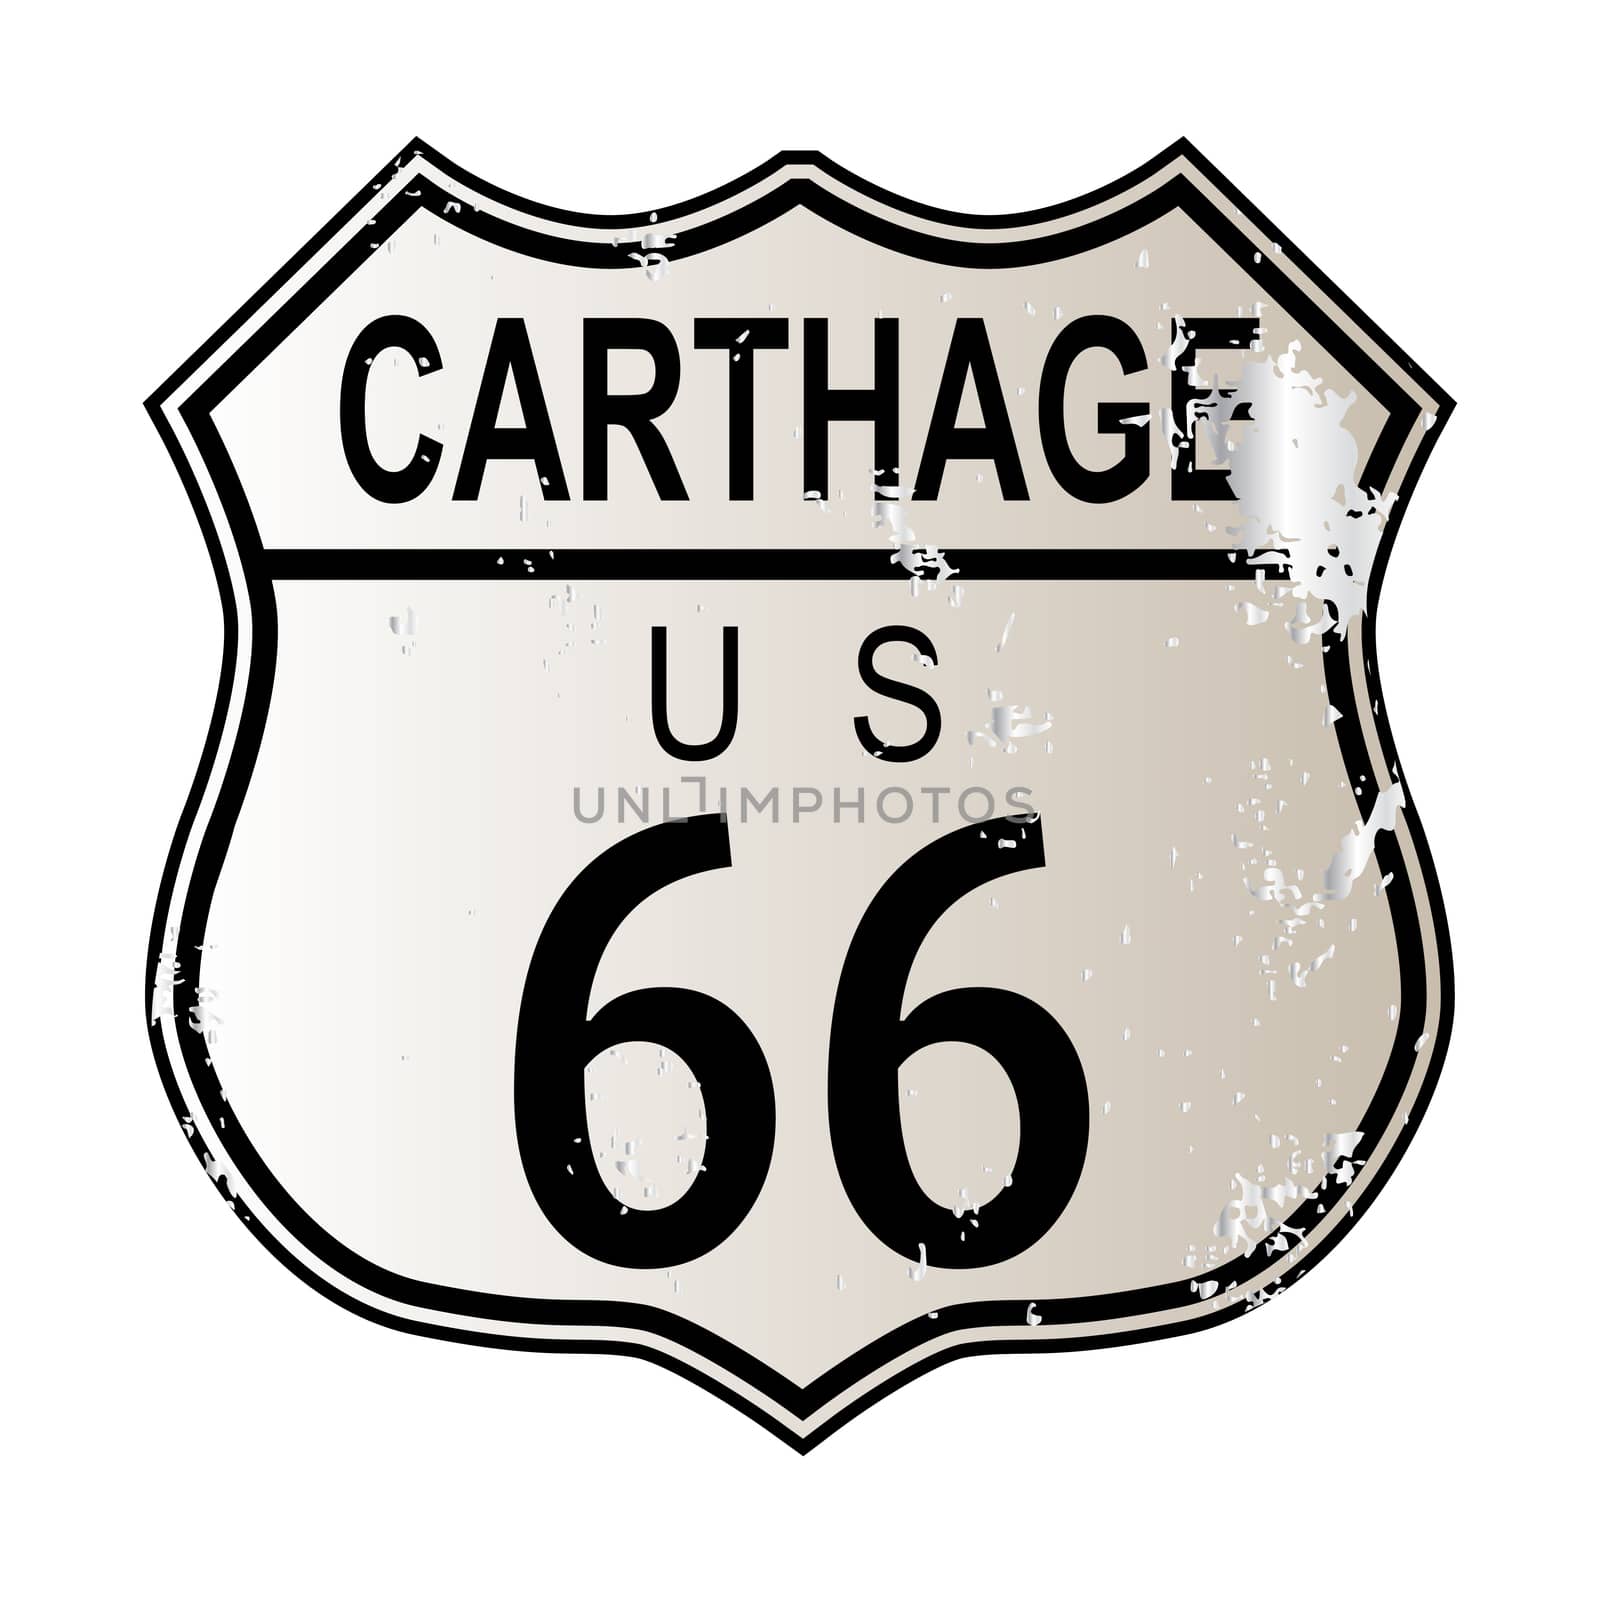 Carthage Route 66 Highway Sign by Bigalbaloo